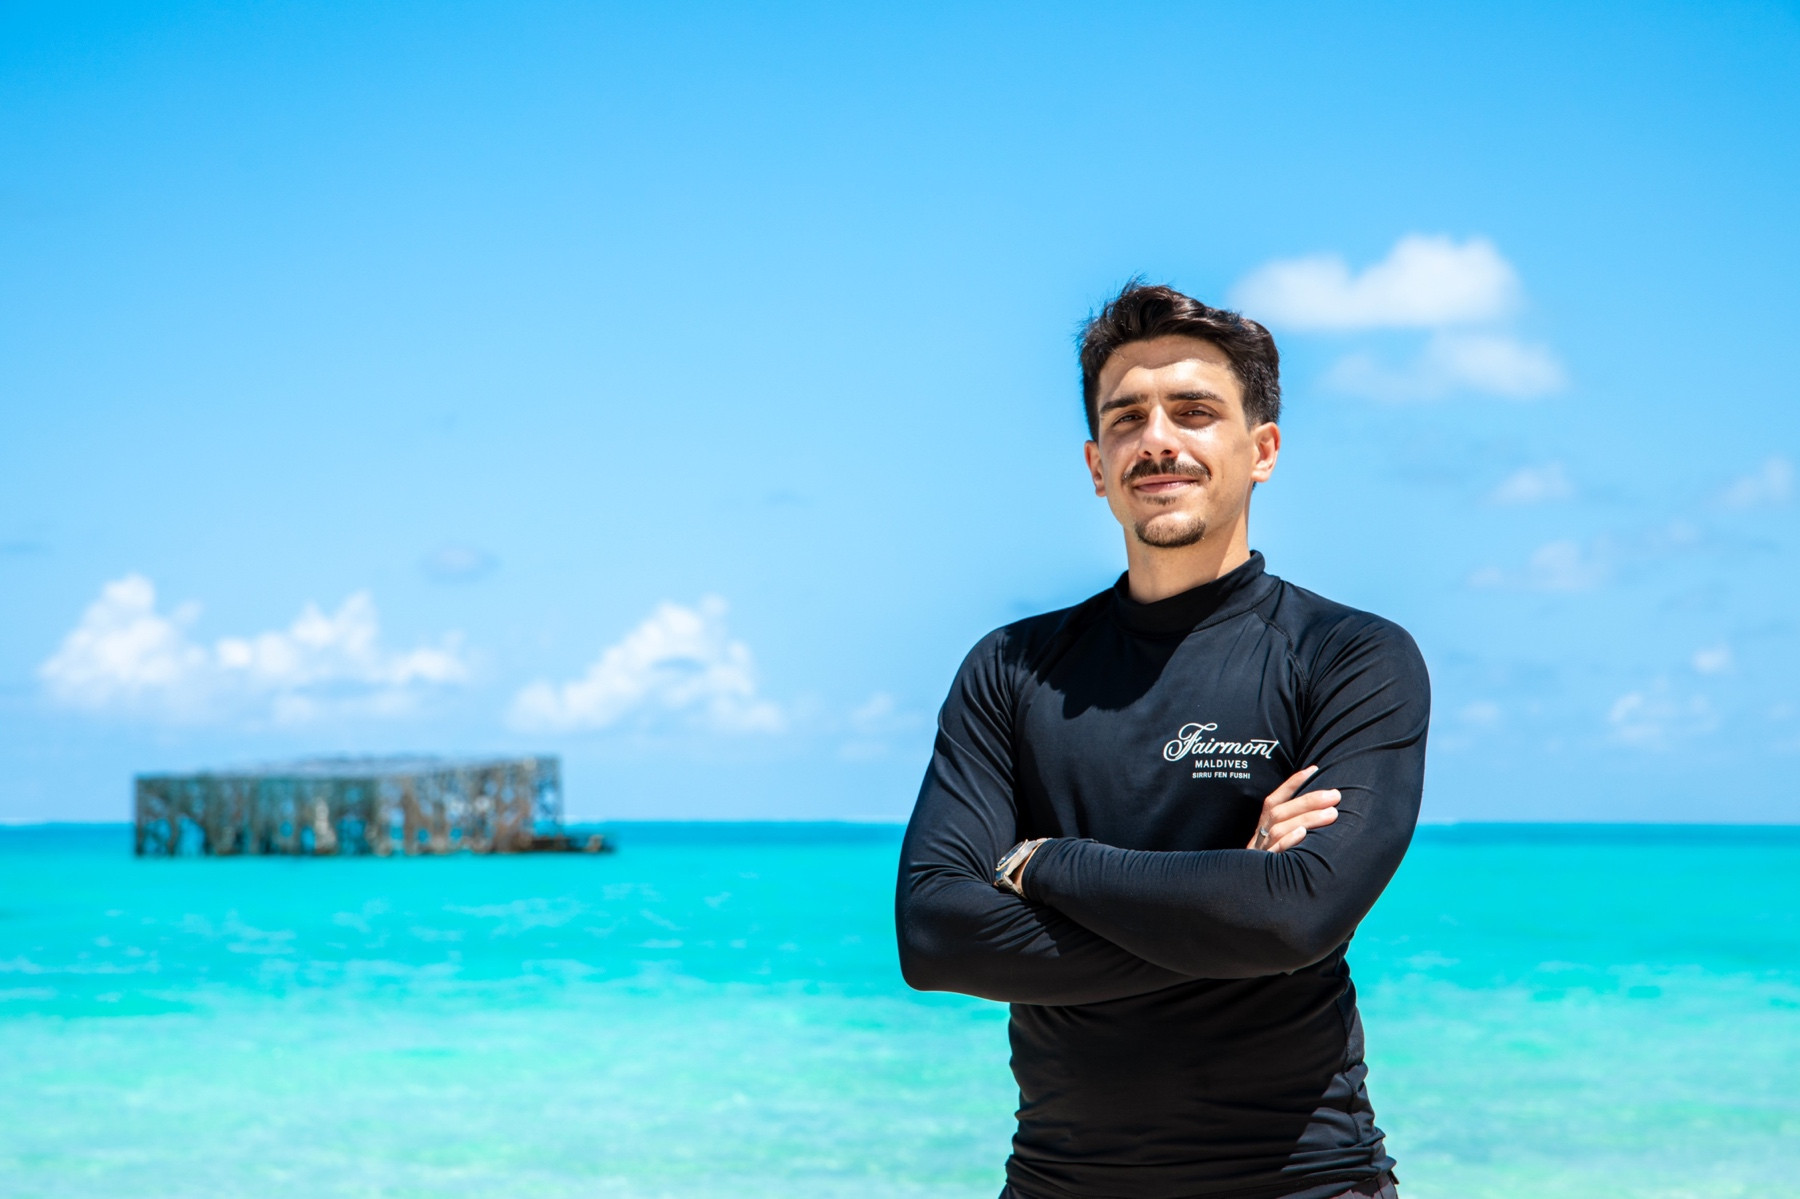 Fairmont Maldives Welcomes David Estellés as Sustainability Manager to Spearhead Green Initiatives